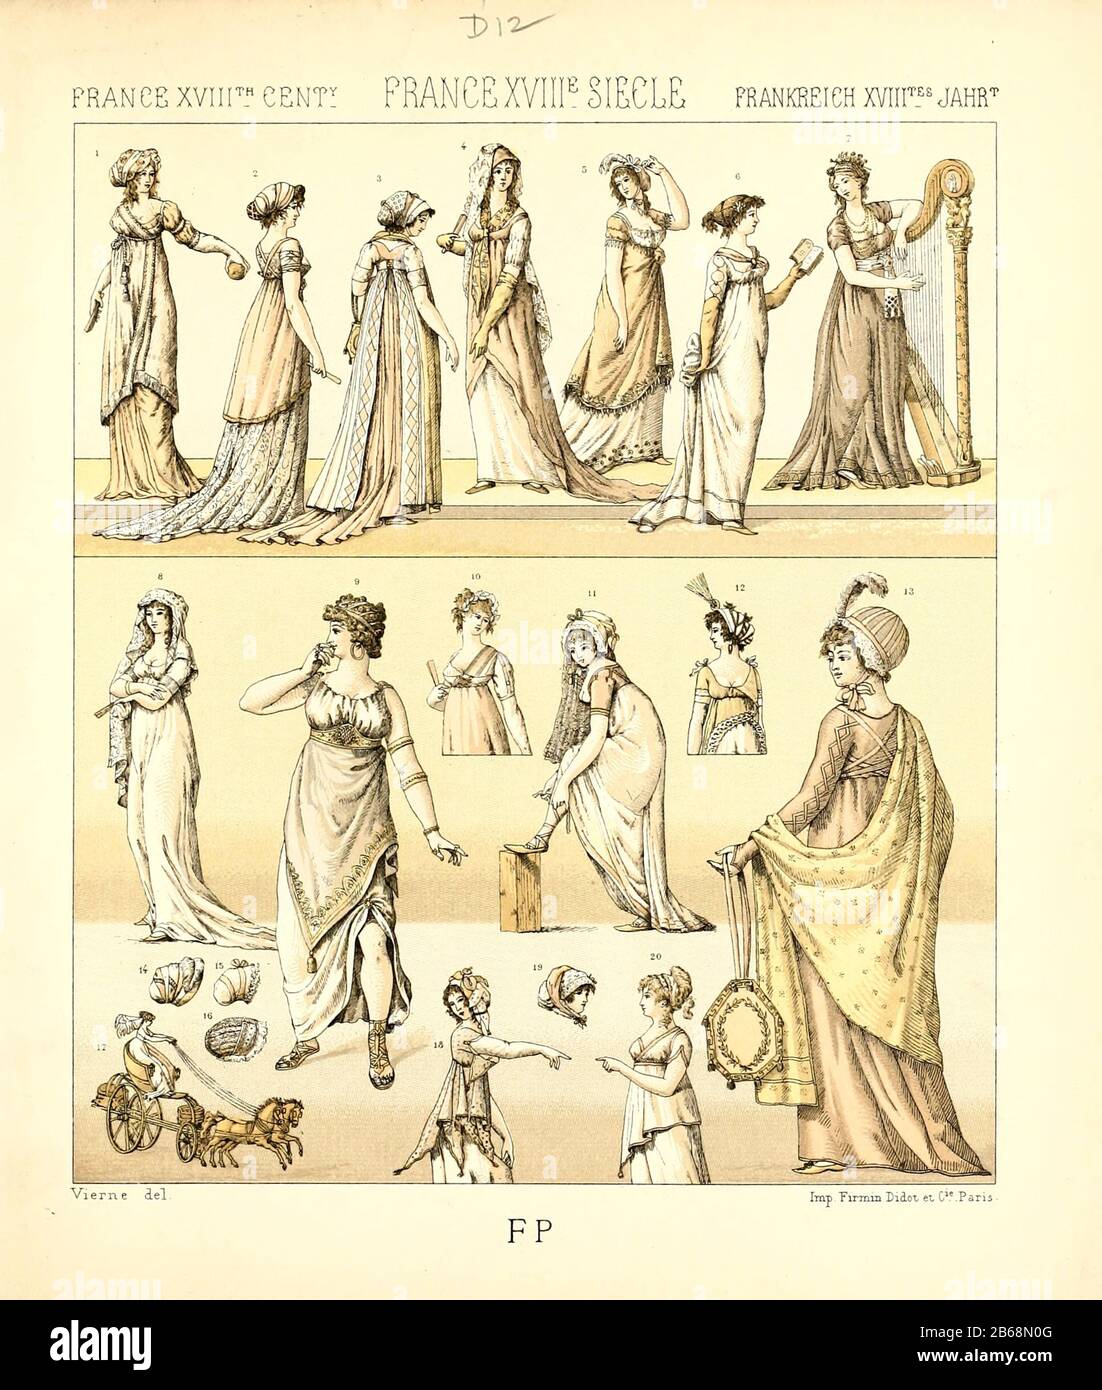 18th Century French fashion and lifestyle, from Geschichte des kostums in chronologischer entwicklung (History of the costume in chronological development) by Racinet, A. (Auguste), 1825-1893. and Rosenberg, Adolf, 1850-1906, Volume 5 printed in Berlin in 1888 Stock Photo